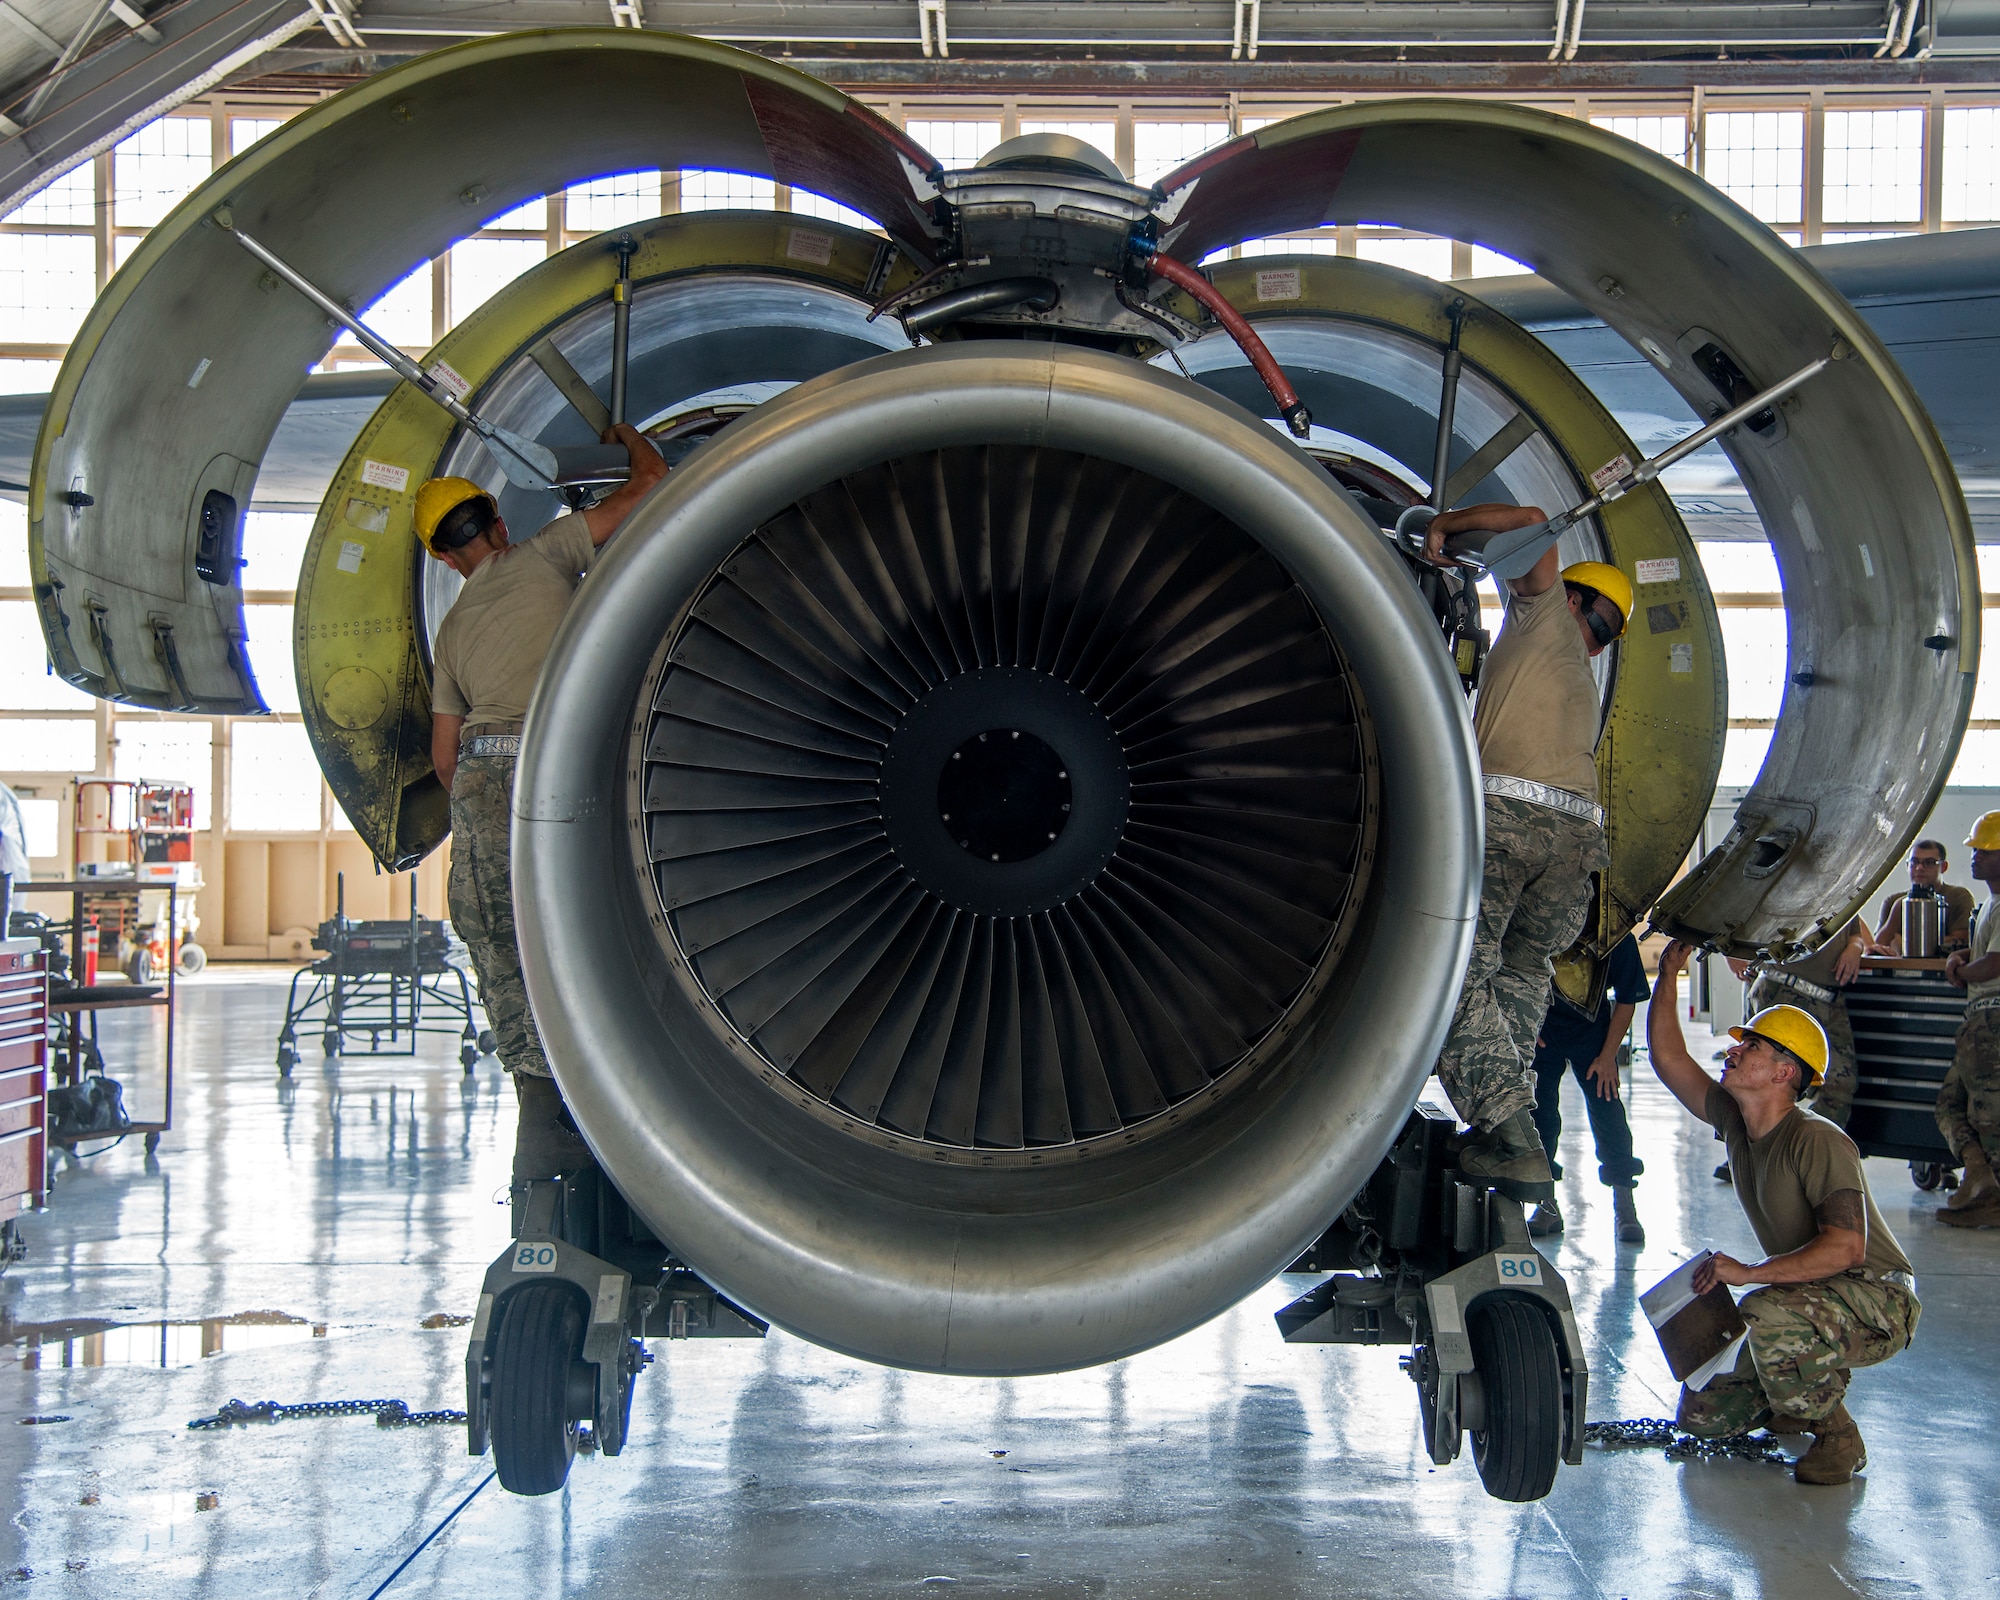 Airmen from the 6th Maintenance Squadron remove the engine from a KC-135 Stratotanker, July 1, 2019, MacDill Air Force Base, Fla.